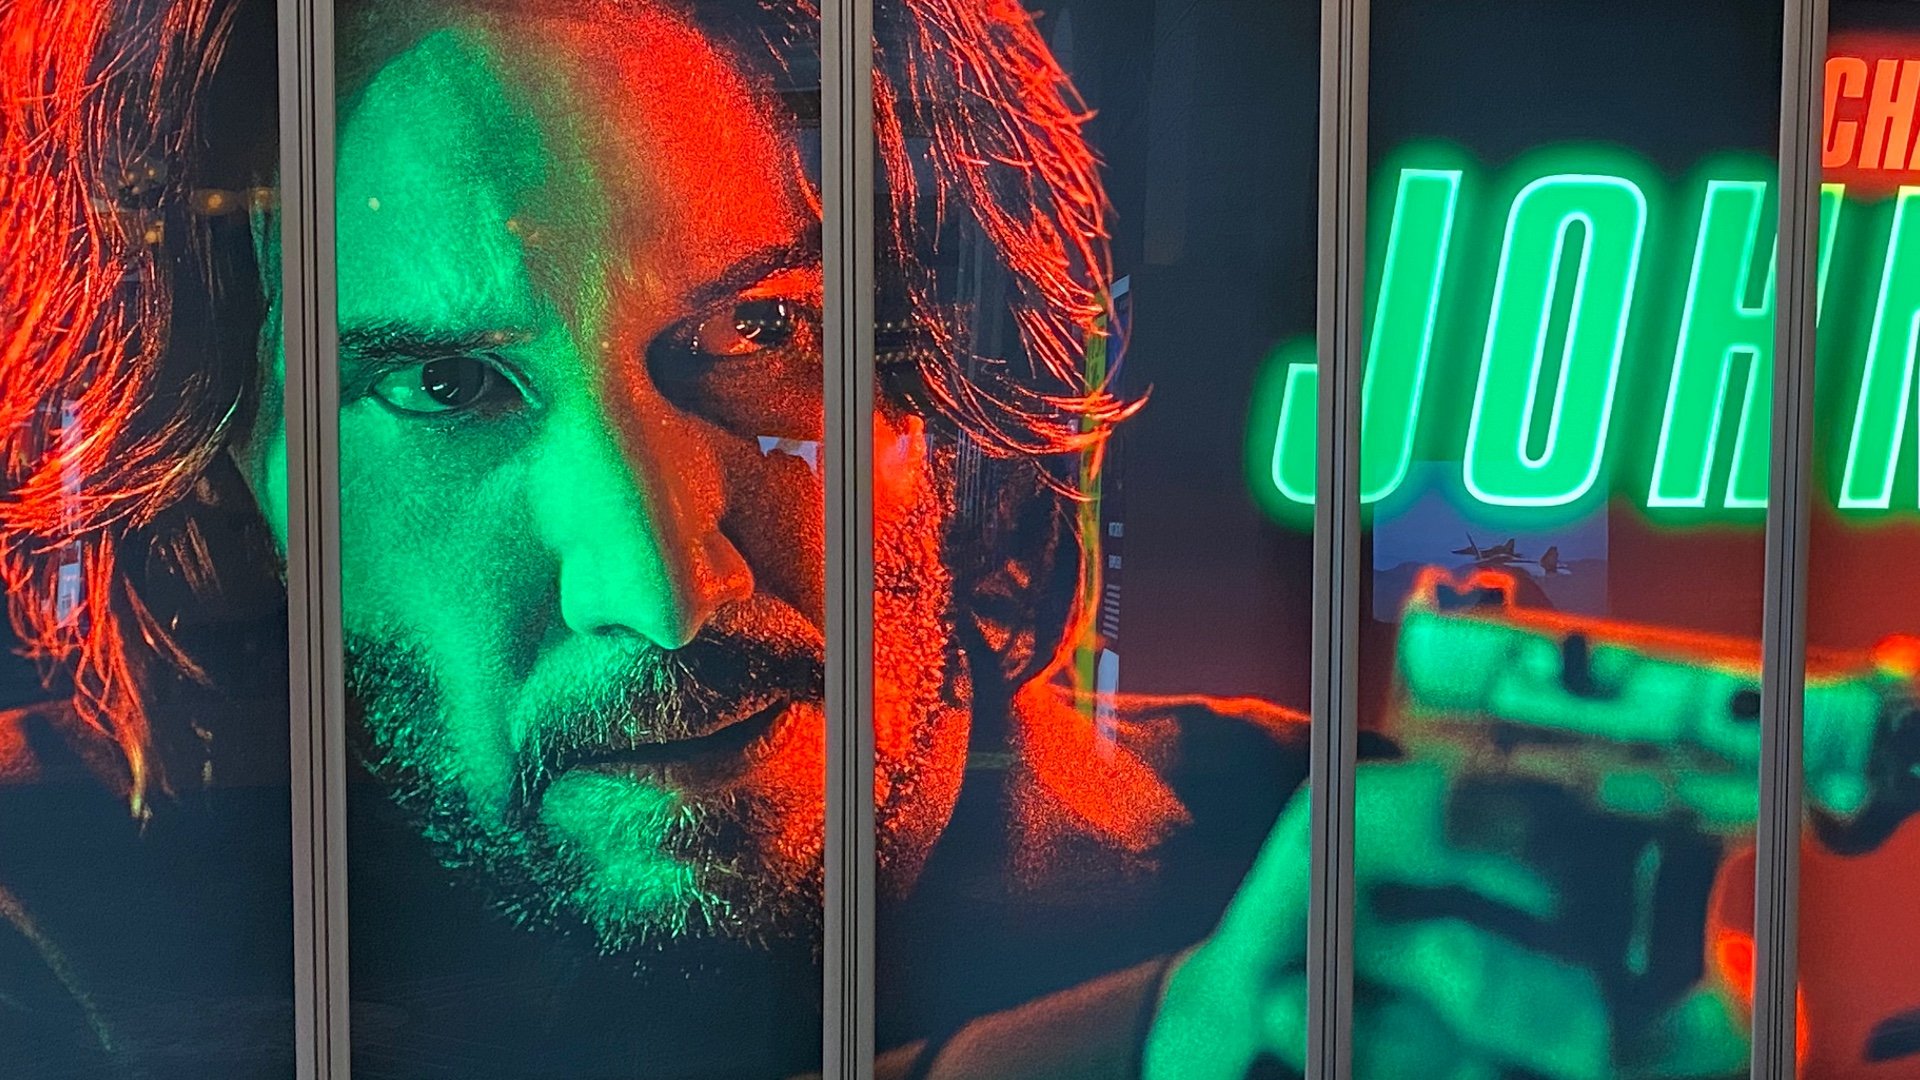 Posters Revealed For JOHN WICK THE EXPENDABLES Idris Elba's BEAST, and James Wan's M3GAN